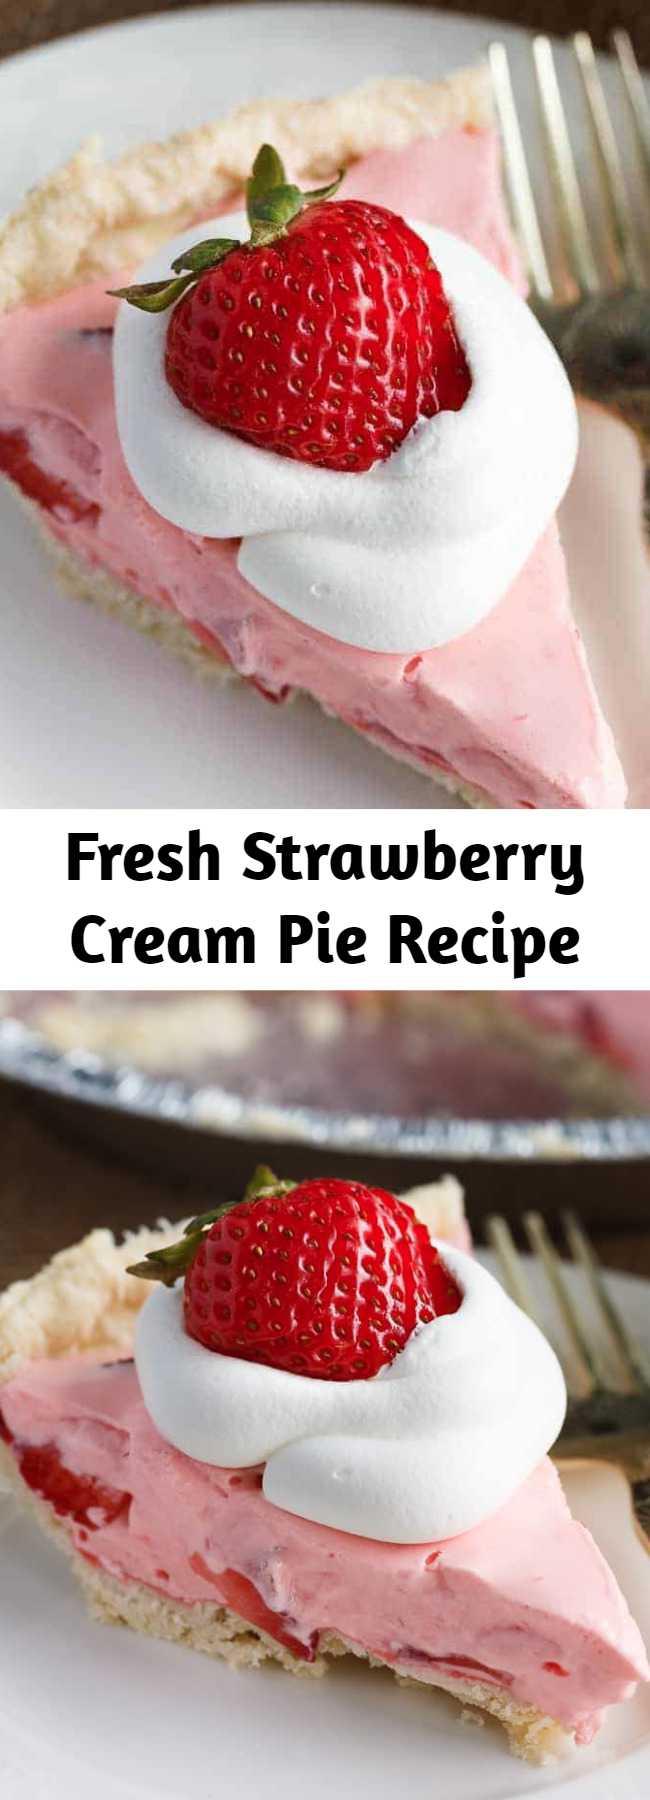 Fresh Strawberry Cream Pie Recipe - It’s light, creamy, sweet and is like pure heaven in your mouth. Strawberry lovers will go nuts over this easy pie recipe. Seriously, it’s soooo good. Tastes like a dream! This easy summer pie is creamy, sweet and refreshing. #dessert #summer